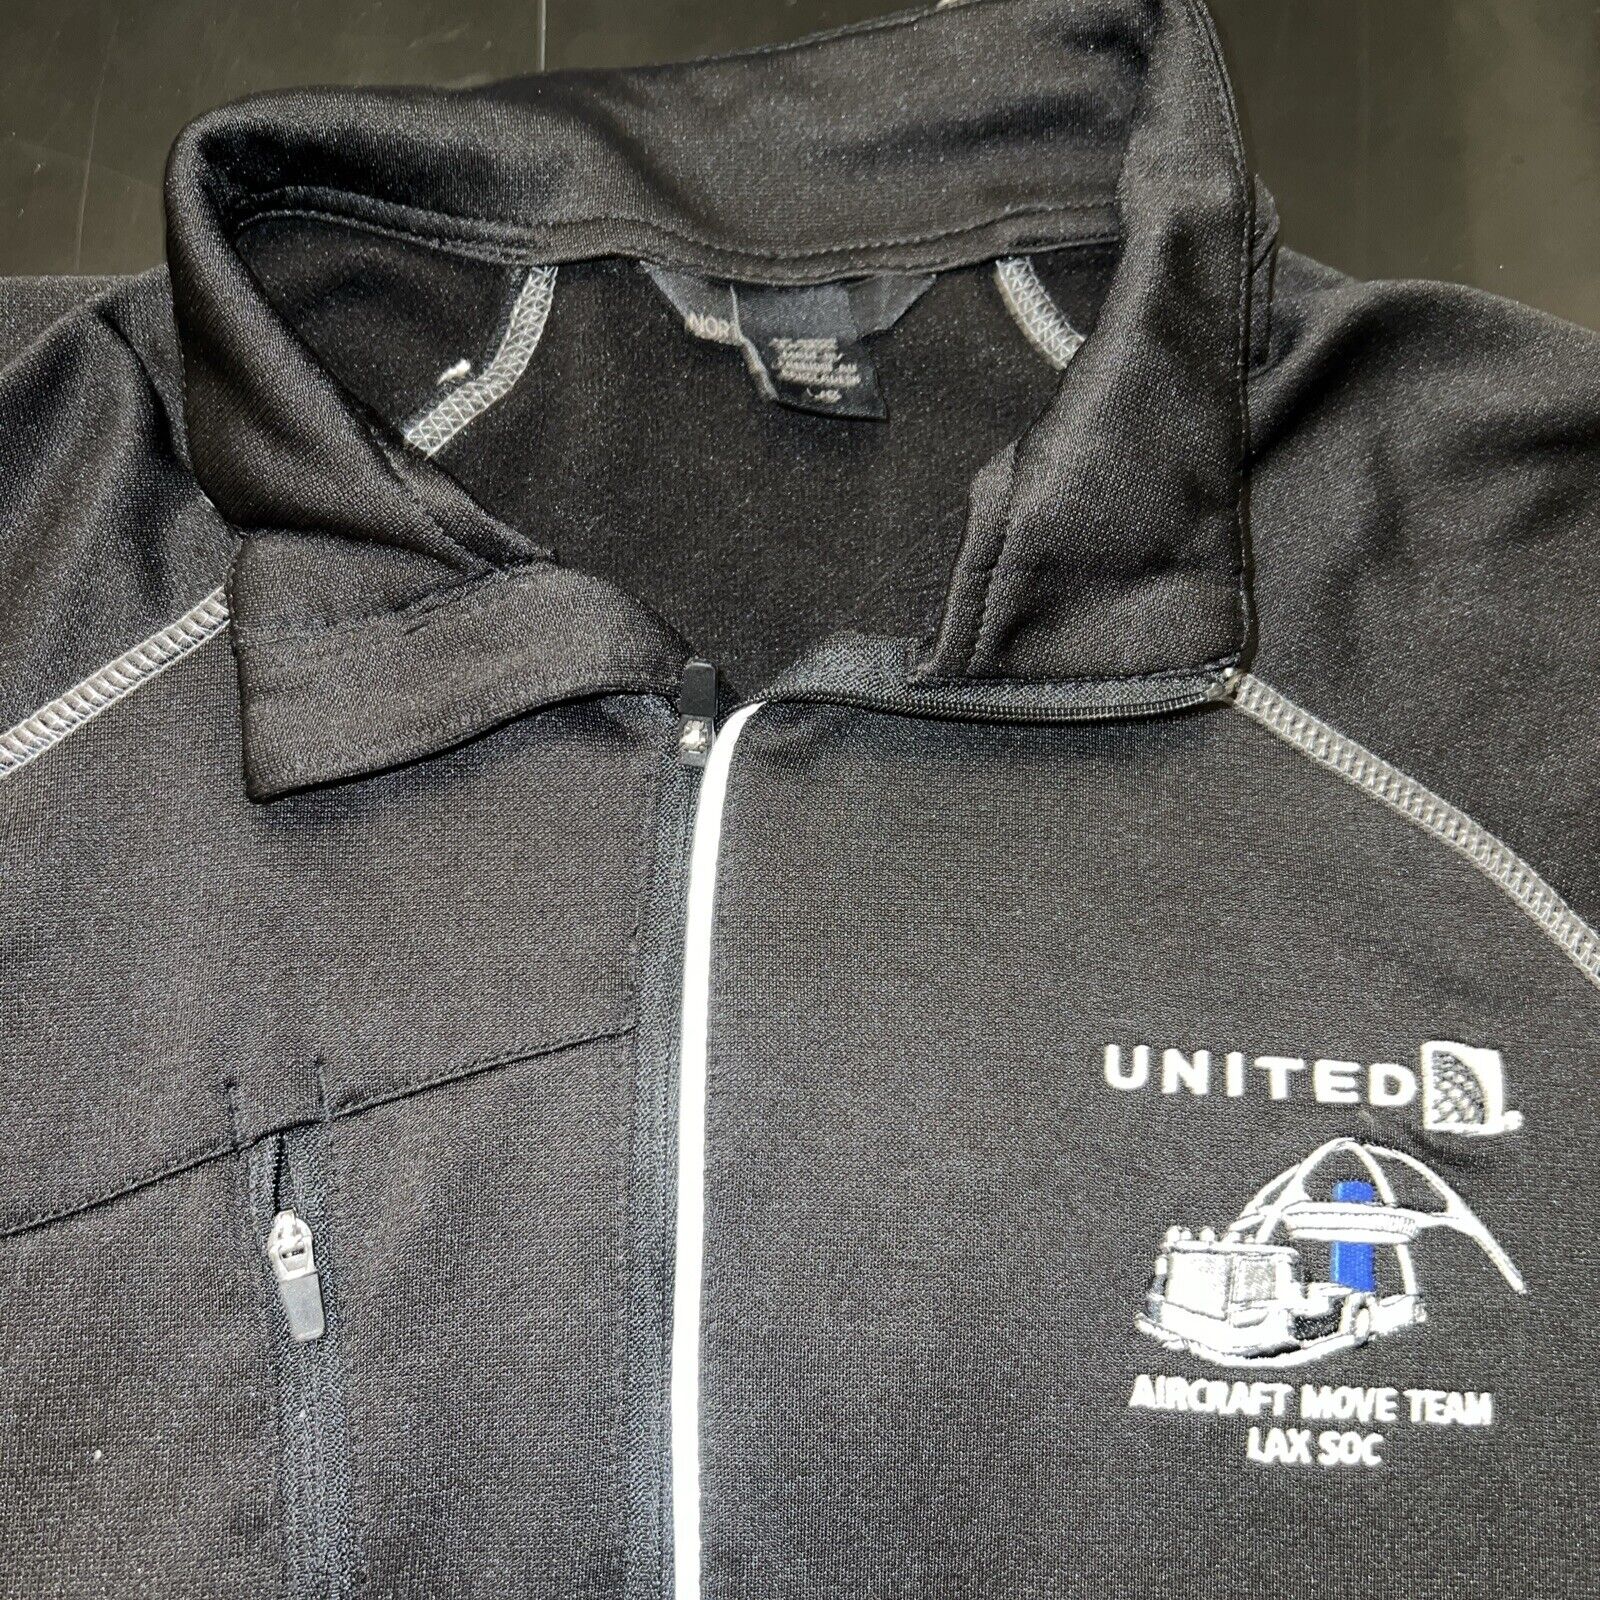 NWOT Official United Airlines Aircraft Move LAX SOC Sweatshirt Uni Large Black